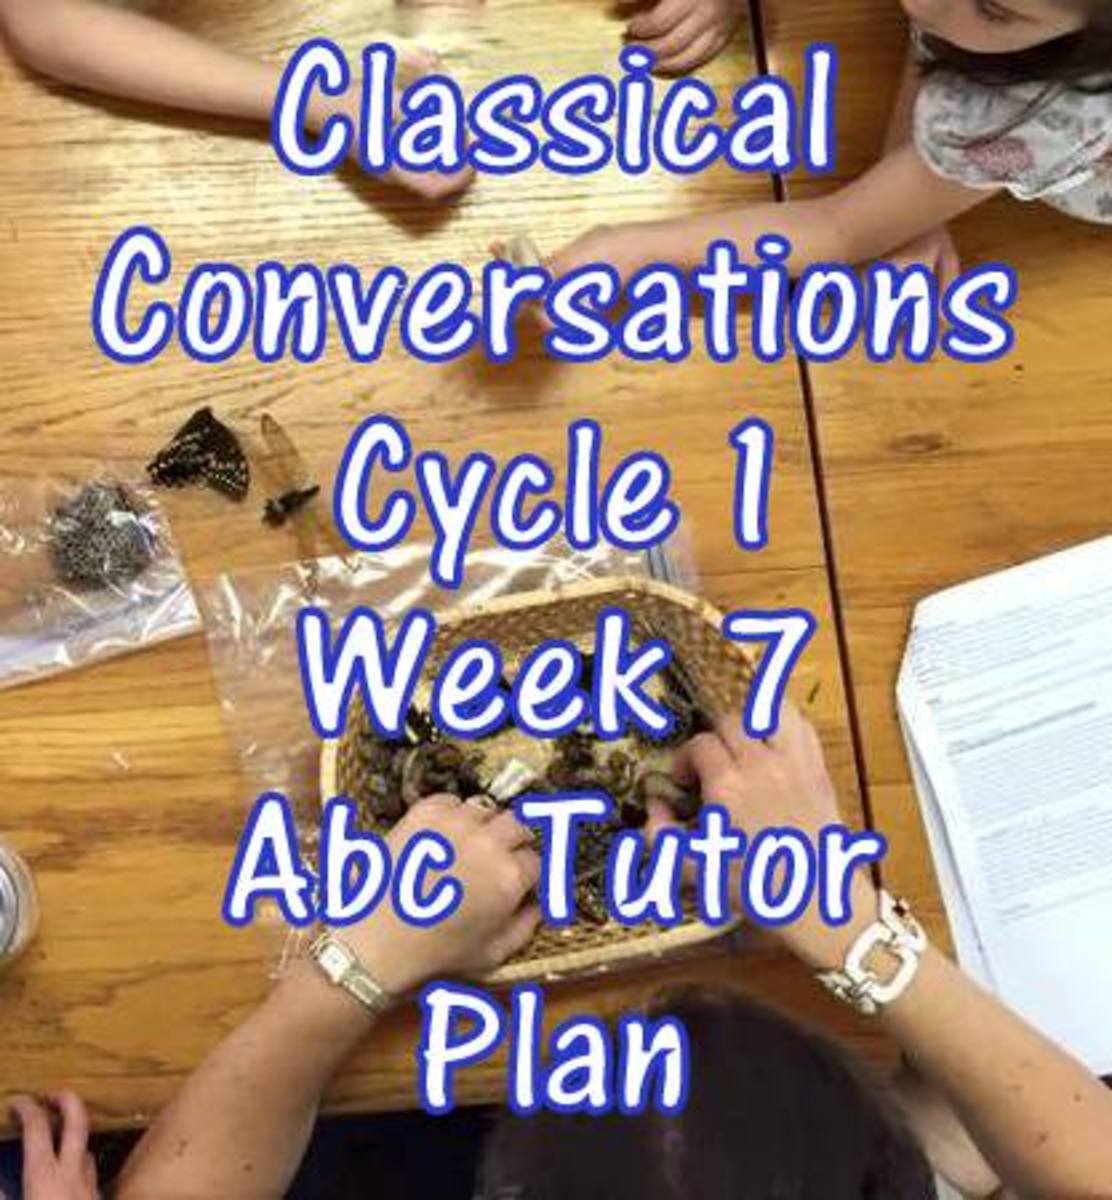 Classical Conversations Cycle 1 Week 7 Abc Tutor Plan - Science Activity: Animals Around You